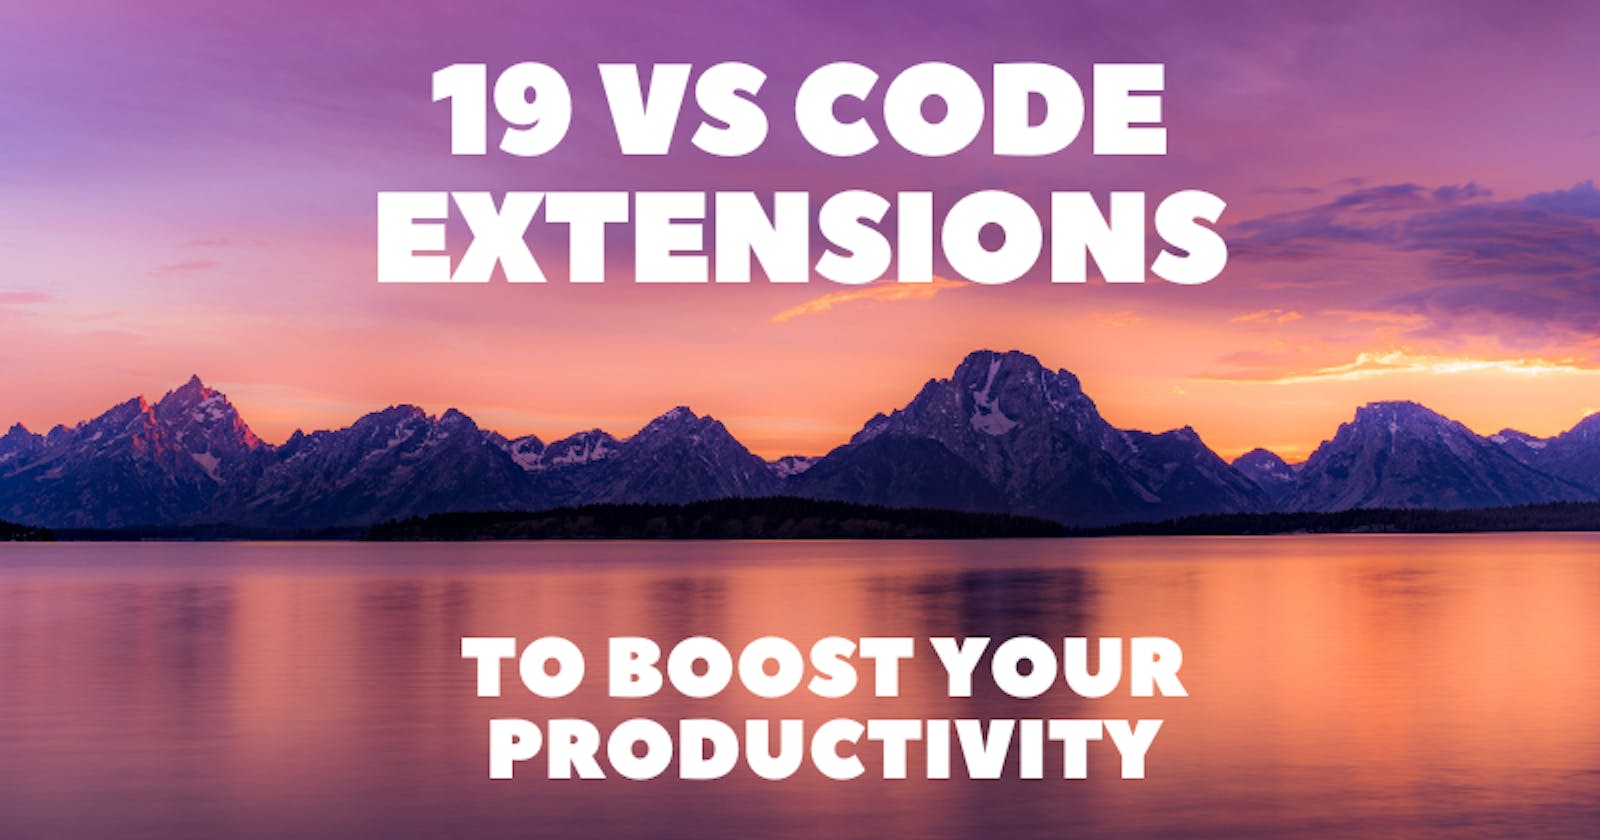 19 VS Code Extensions To Boost Your Productivity 🚀🔥